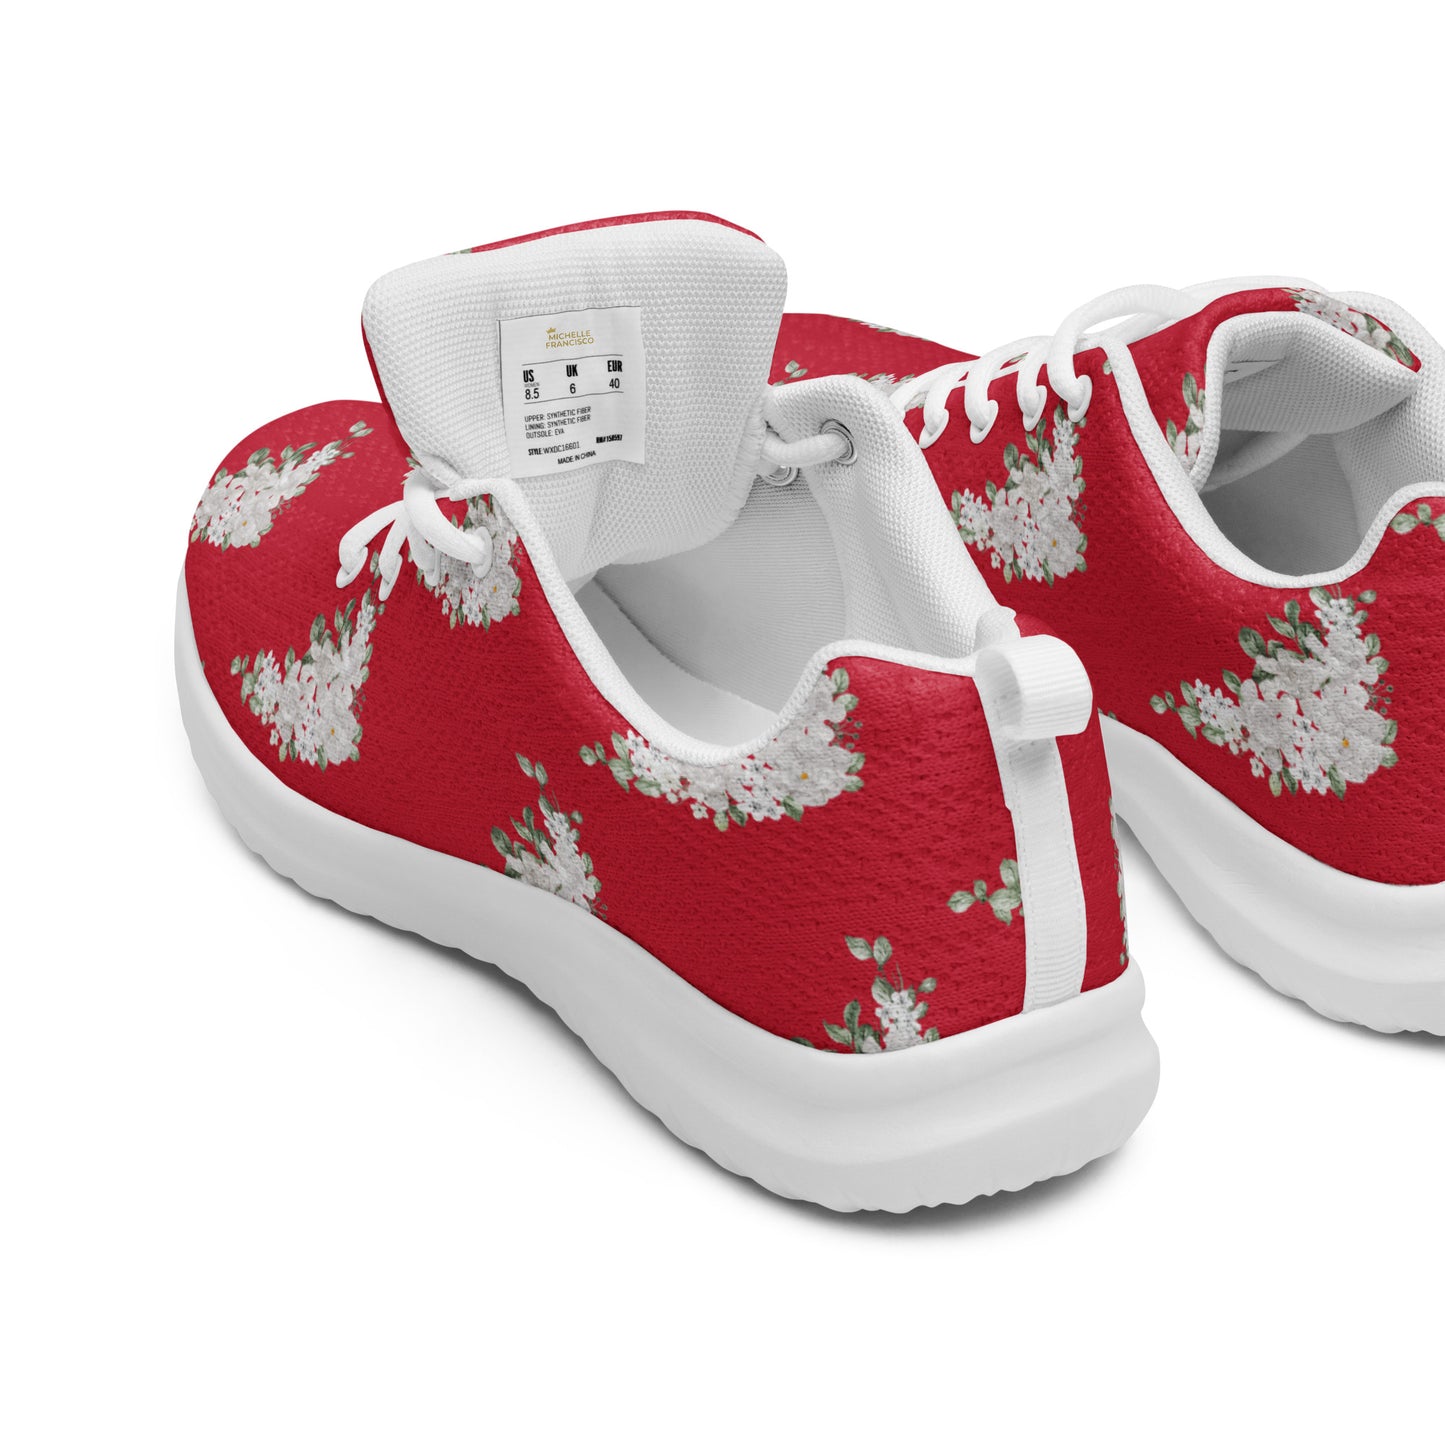 Women’s Red White Flowers Athletic Shoes